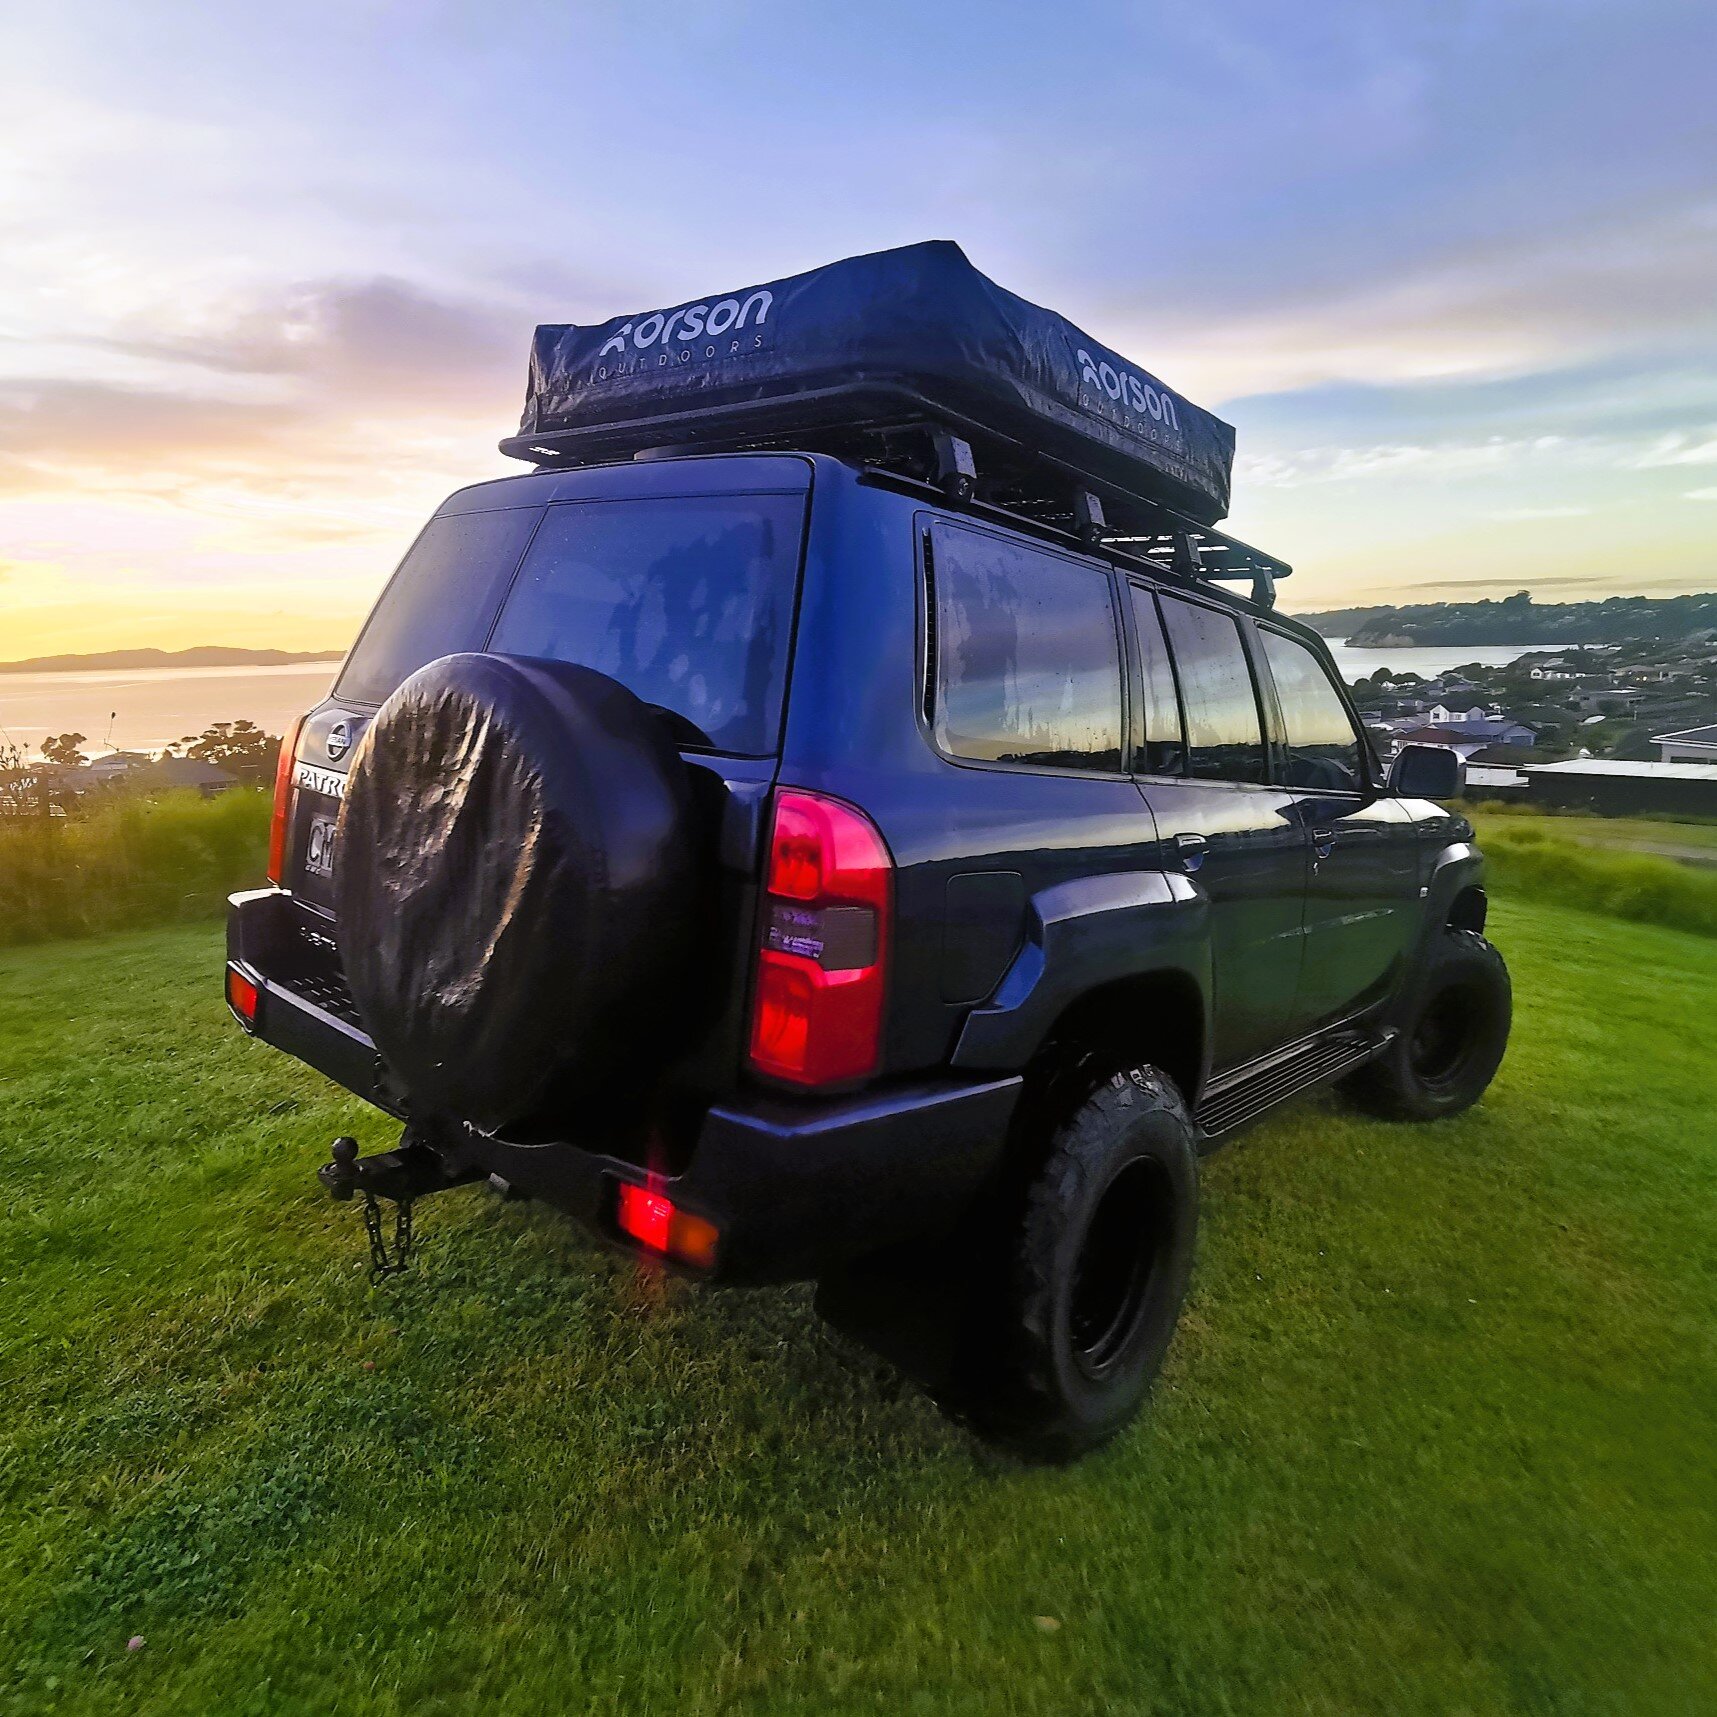 Our tow wagon is up for sale and if someone buys this weekend they'll receive a free offshore charter worth over $2k!

One or two elderly lady drivers, never taken off road or dipped in the blue... See listing here: https://www.trademe.co.nz/a/motors